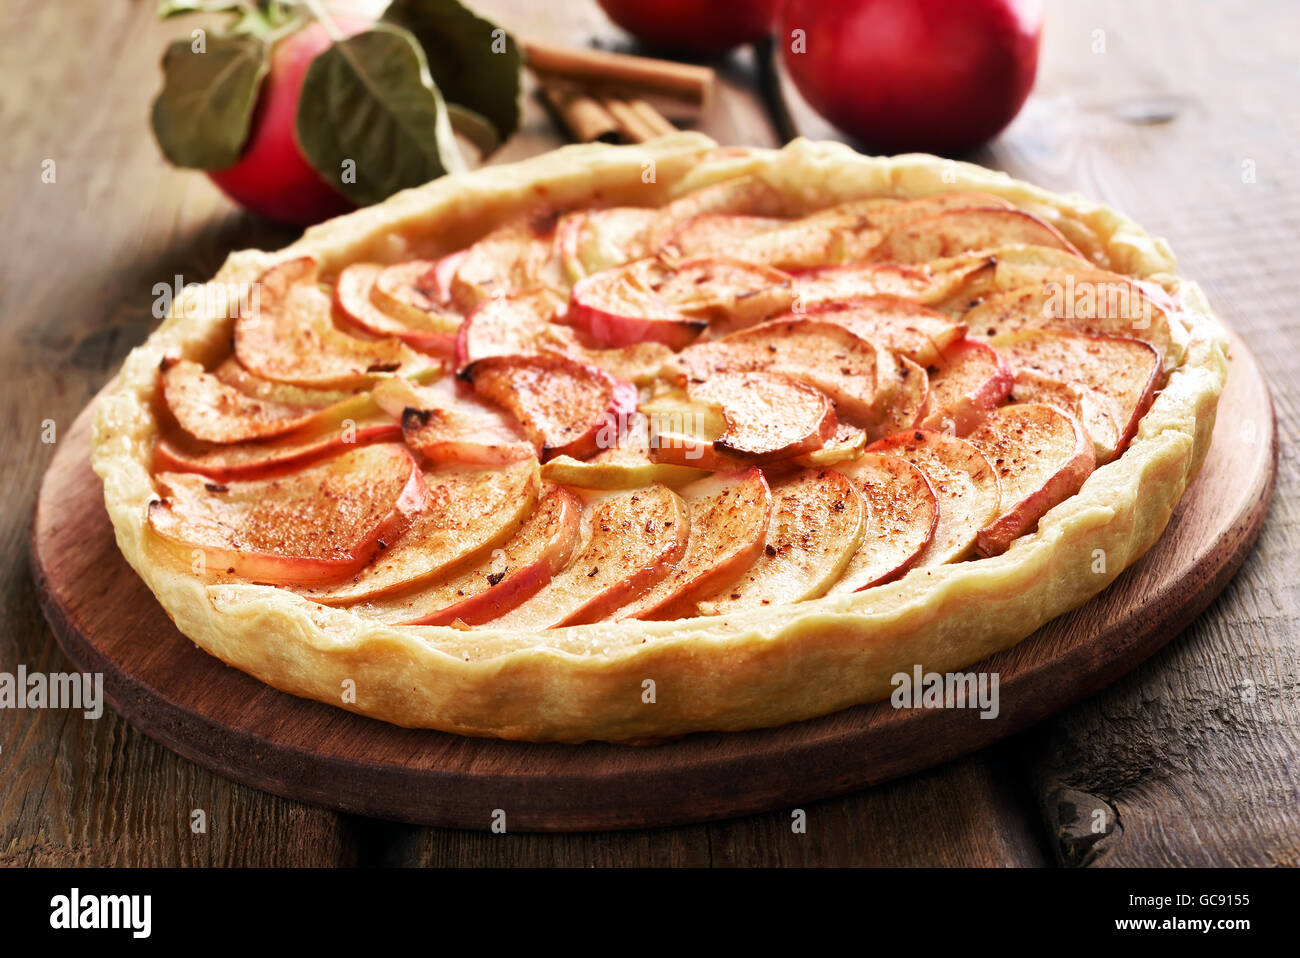 Apple pie on wooden table, close up view Stock Photo